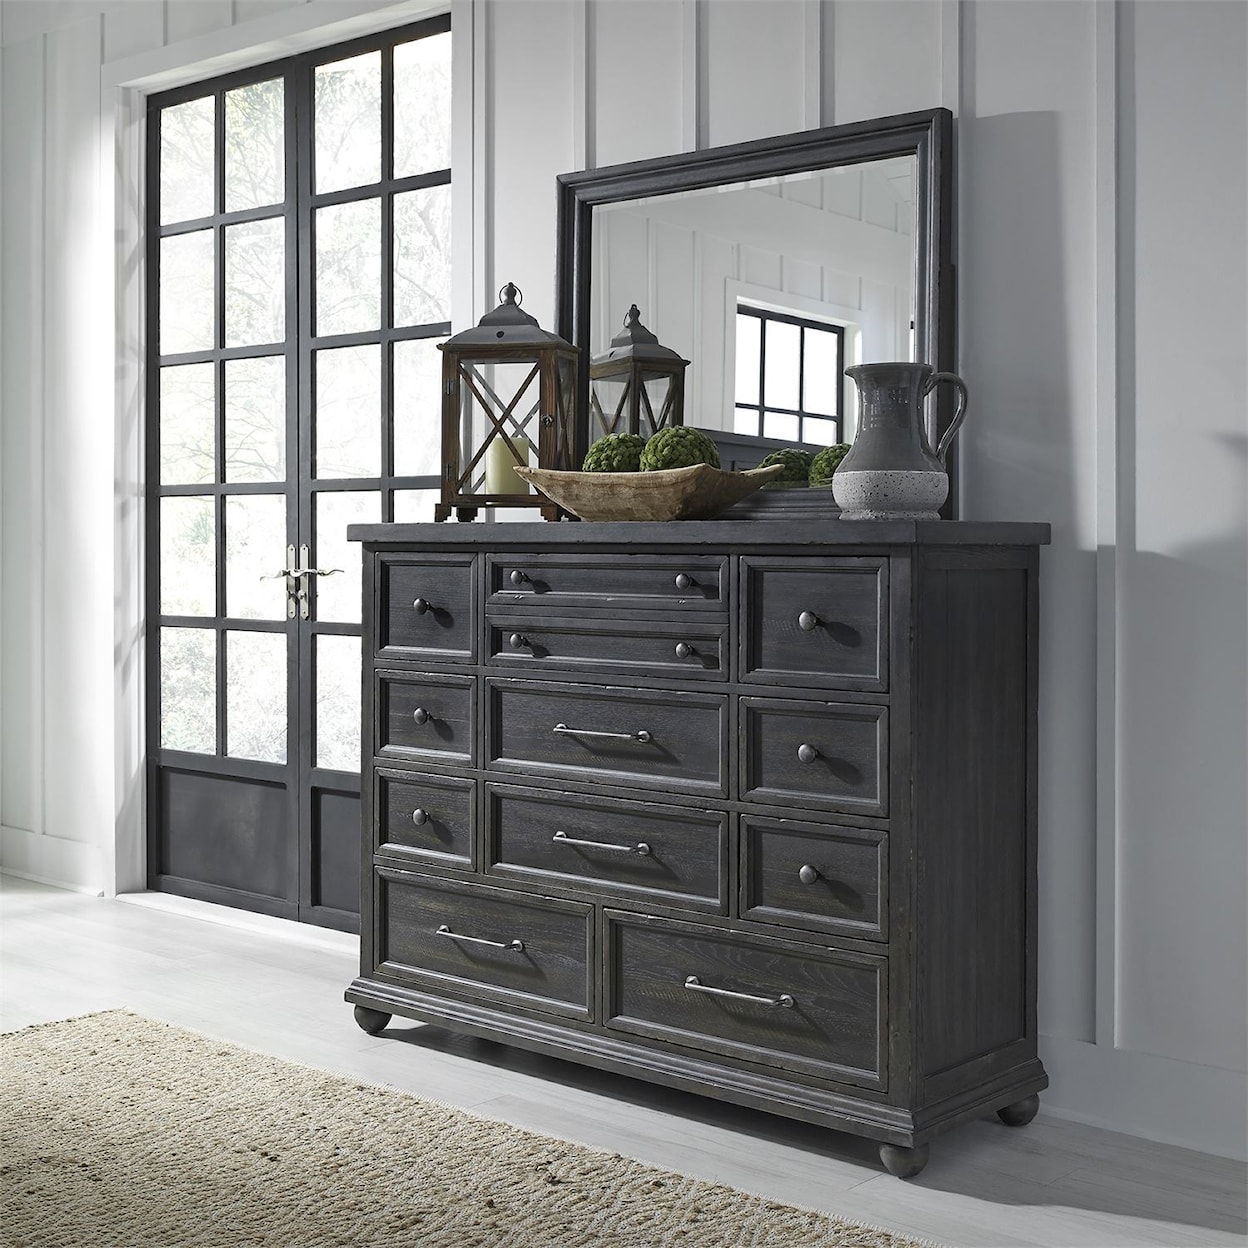 Liberty Furniture Harvest Home Dresser and Mirror